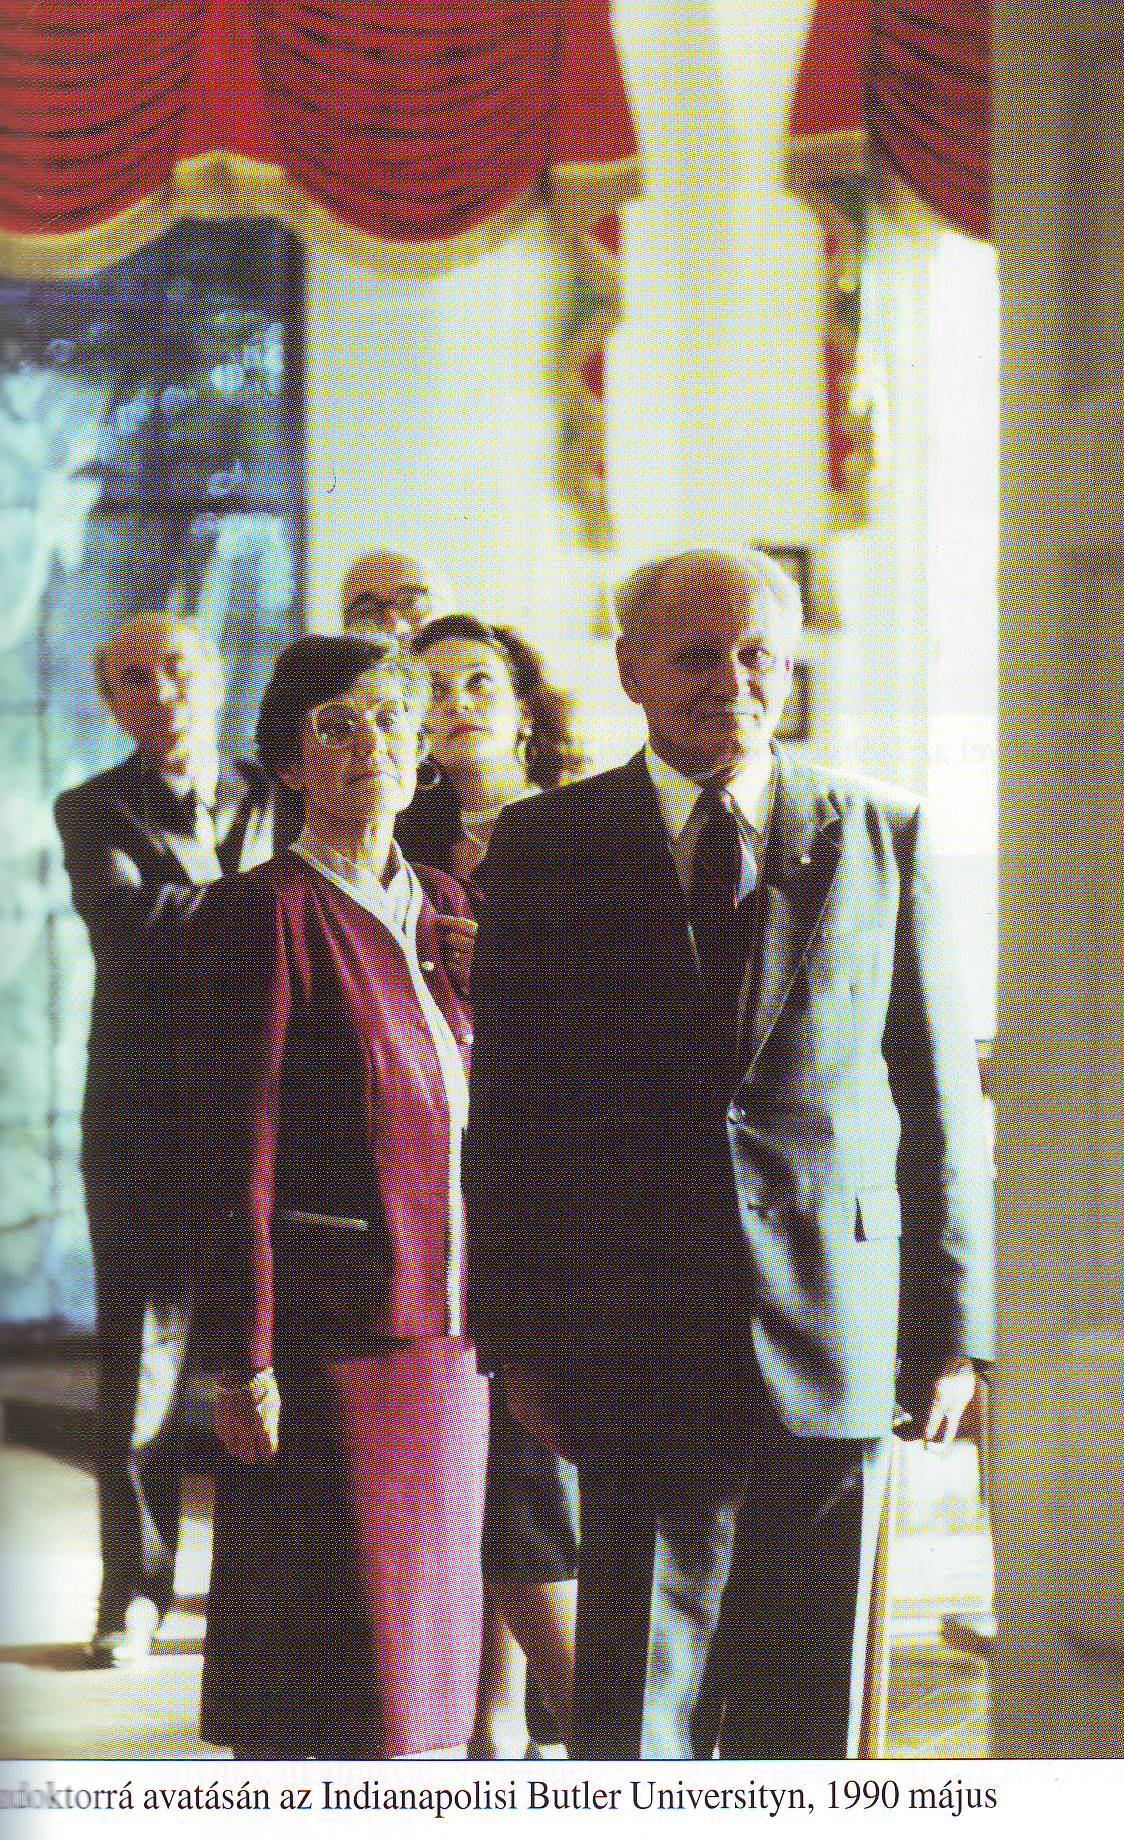 President Árpád Göncz with his wife at the Butler University Indianapolis receiving his Honorary Doctorate in May 1990.